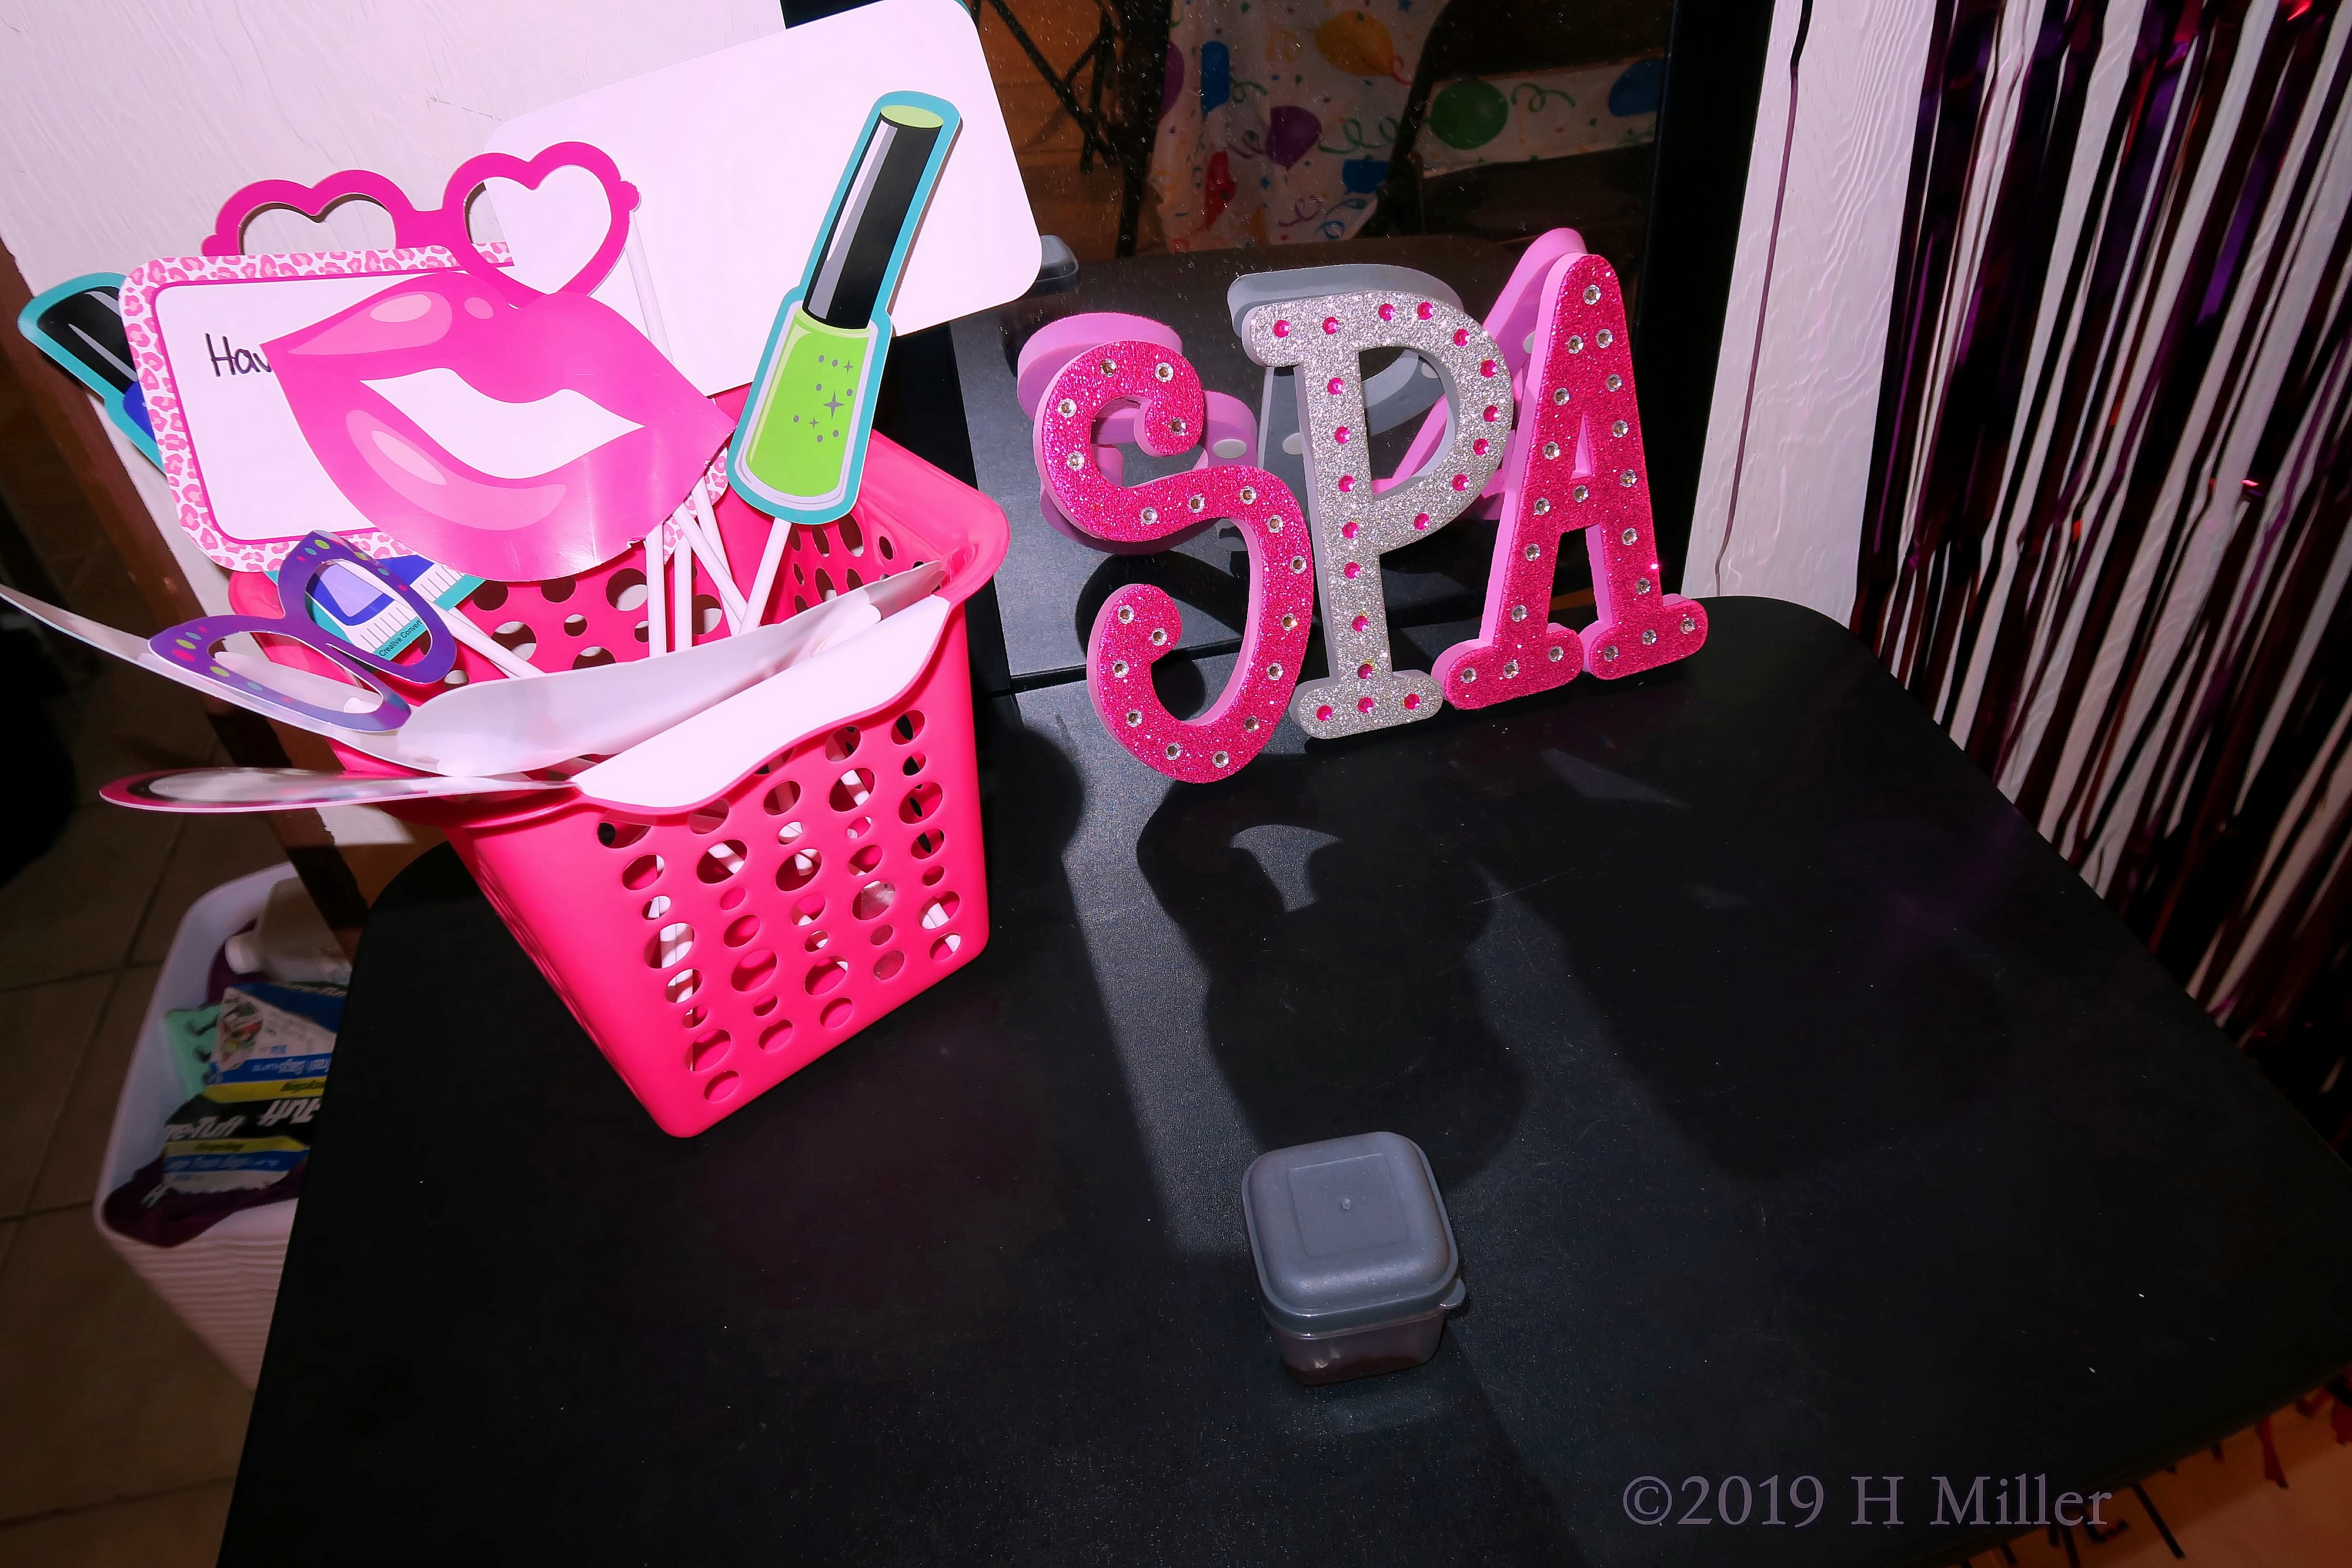 Decorative Elements For The Spa Birthday Party